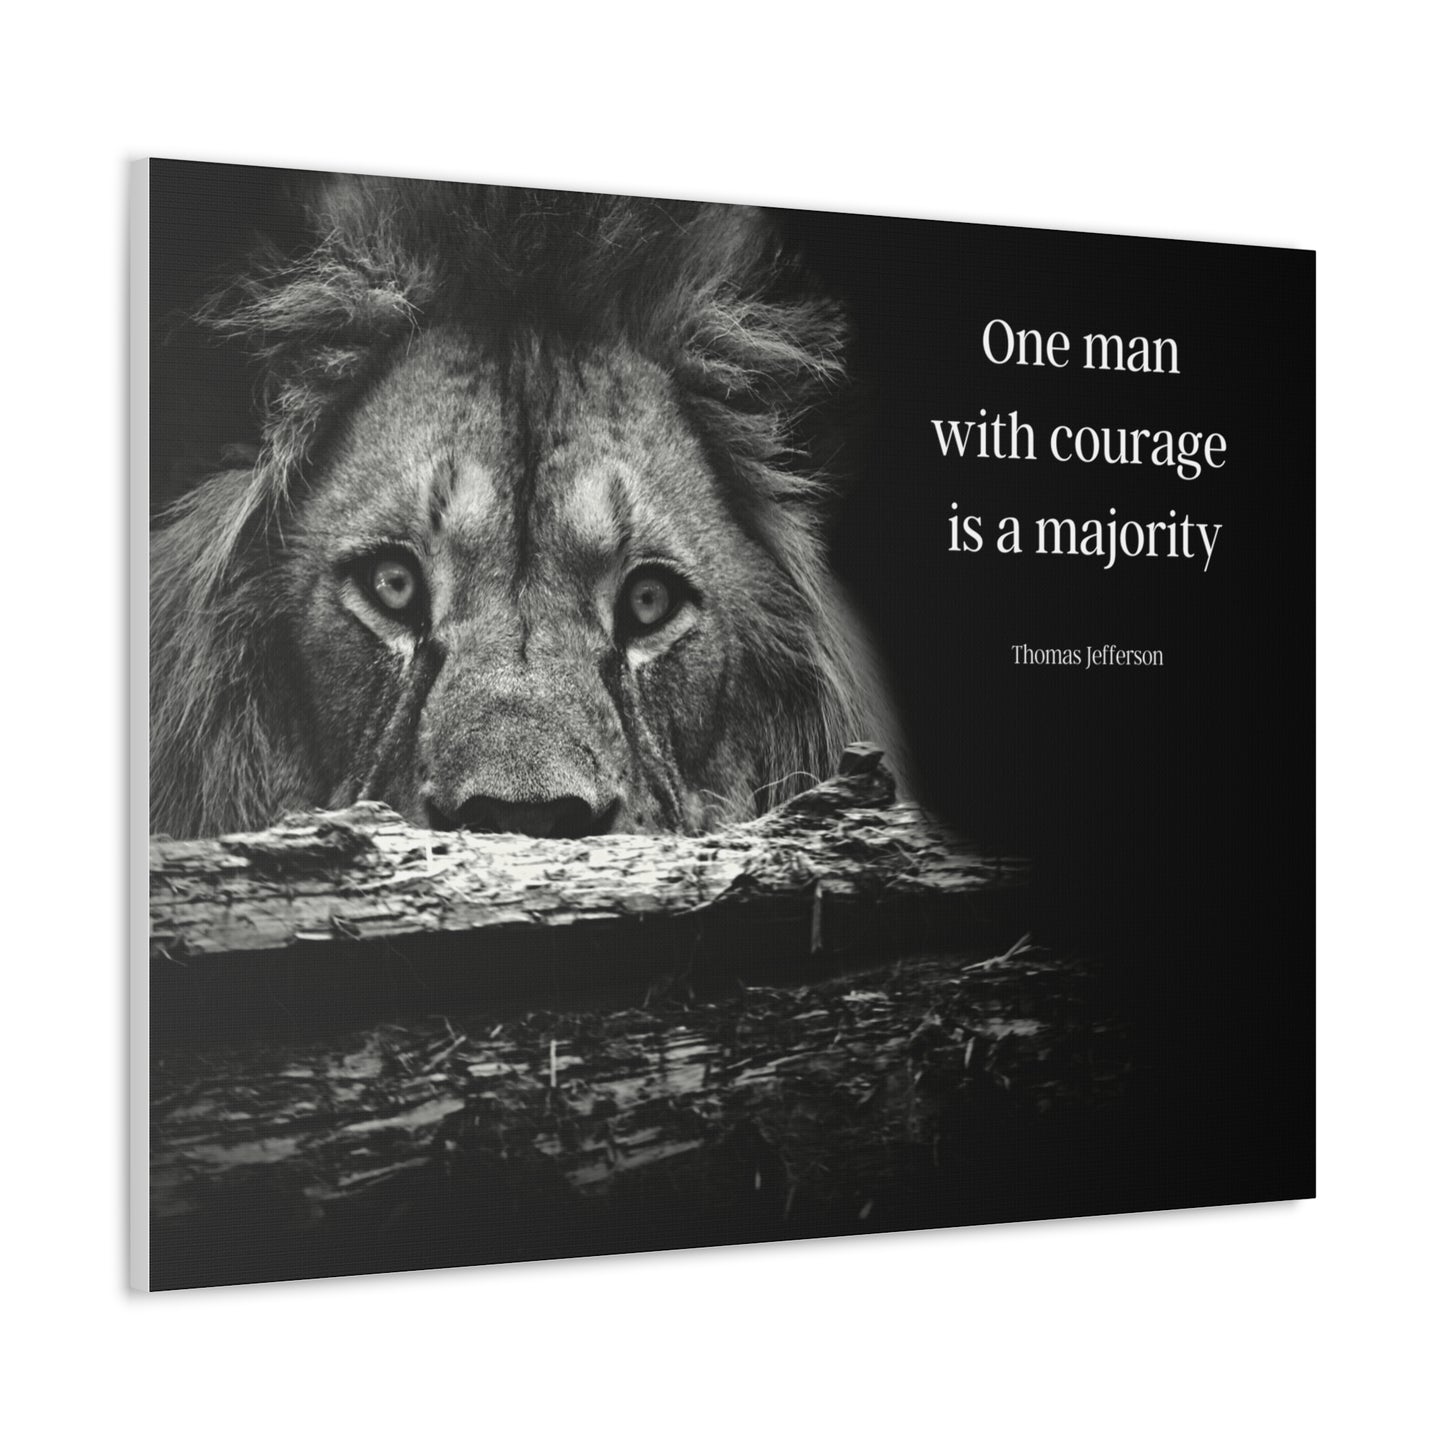 Thomas Jefferson Quote 4, Canvas Art, Horizontal Print, Lion, Courage, 3rd President of the United States, American Patriots, AI Art, Political Art, Canvas Prints, Presidential Quotes, Inspirational Quotes